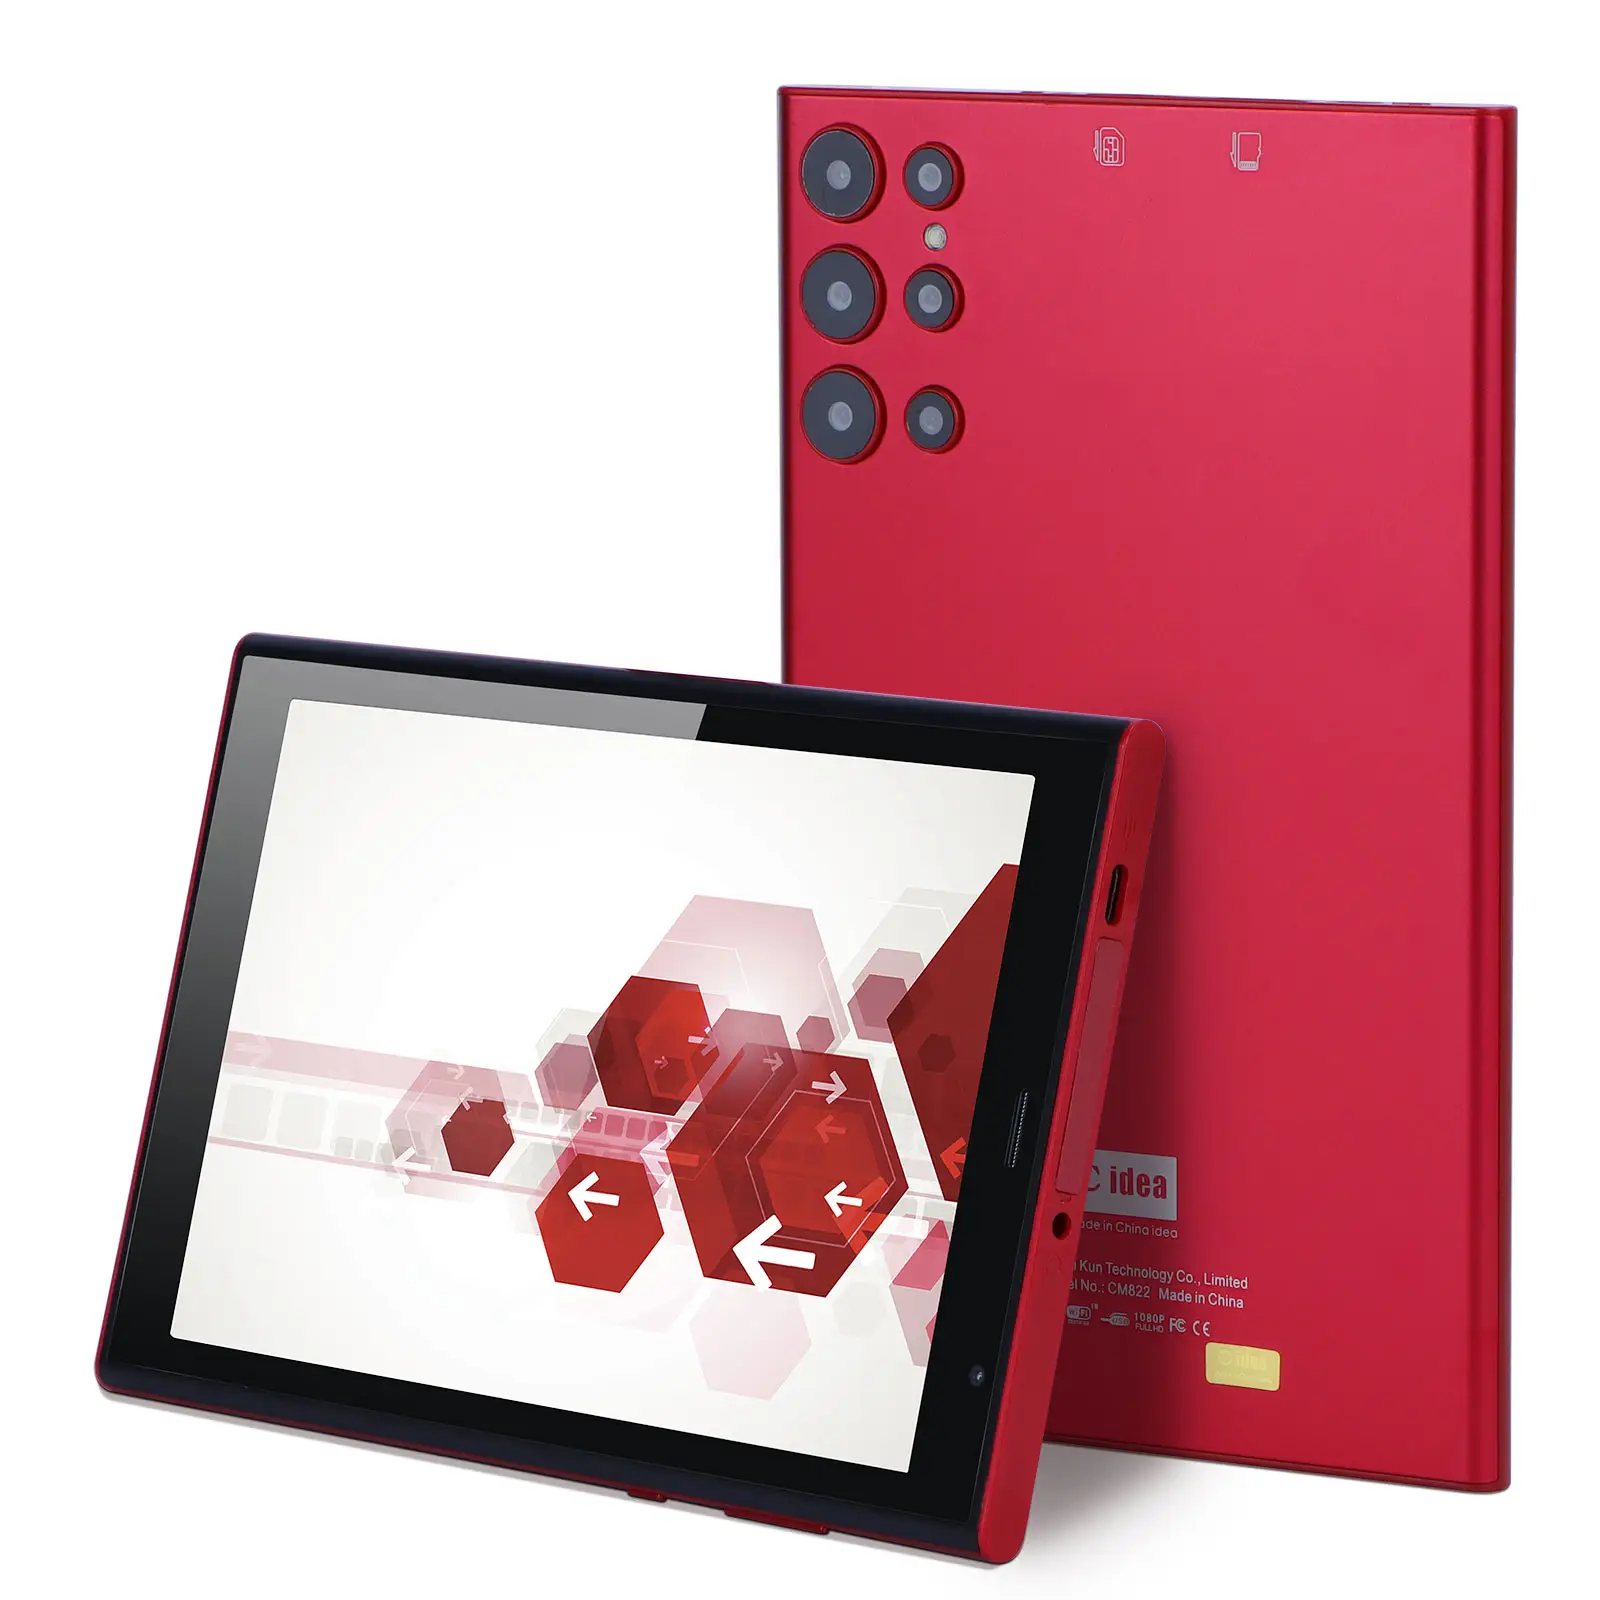 C idea ODM Quad Core 8000mAh 5MP+ 8MP for Student Adult Tablet Red 8 inch Android 12 Educational Tablet Red